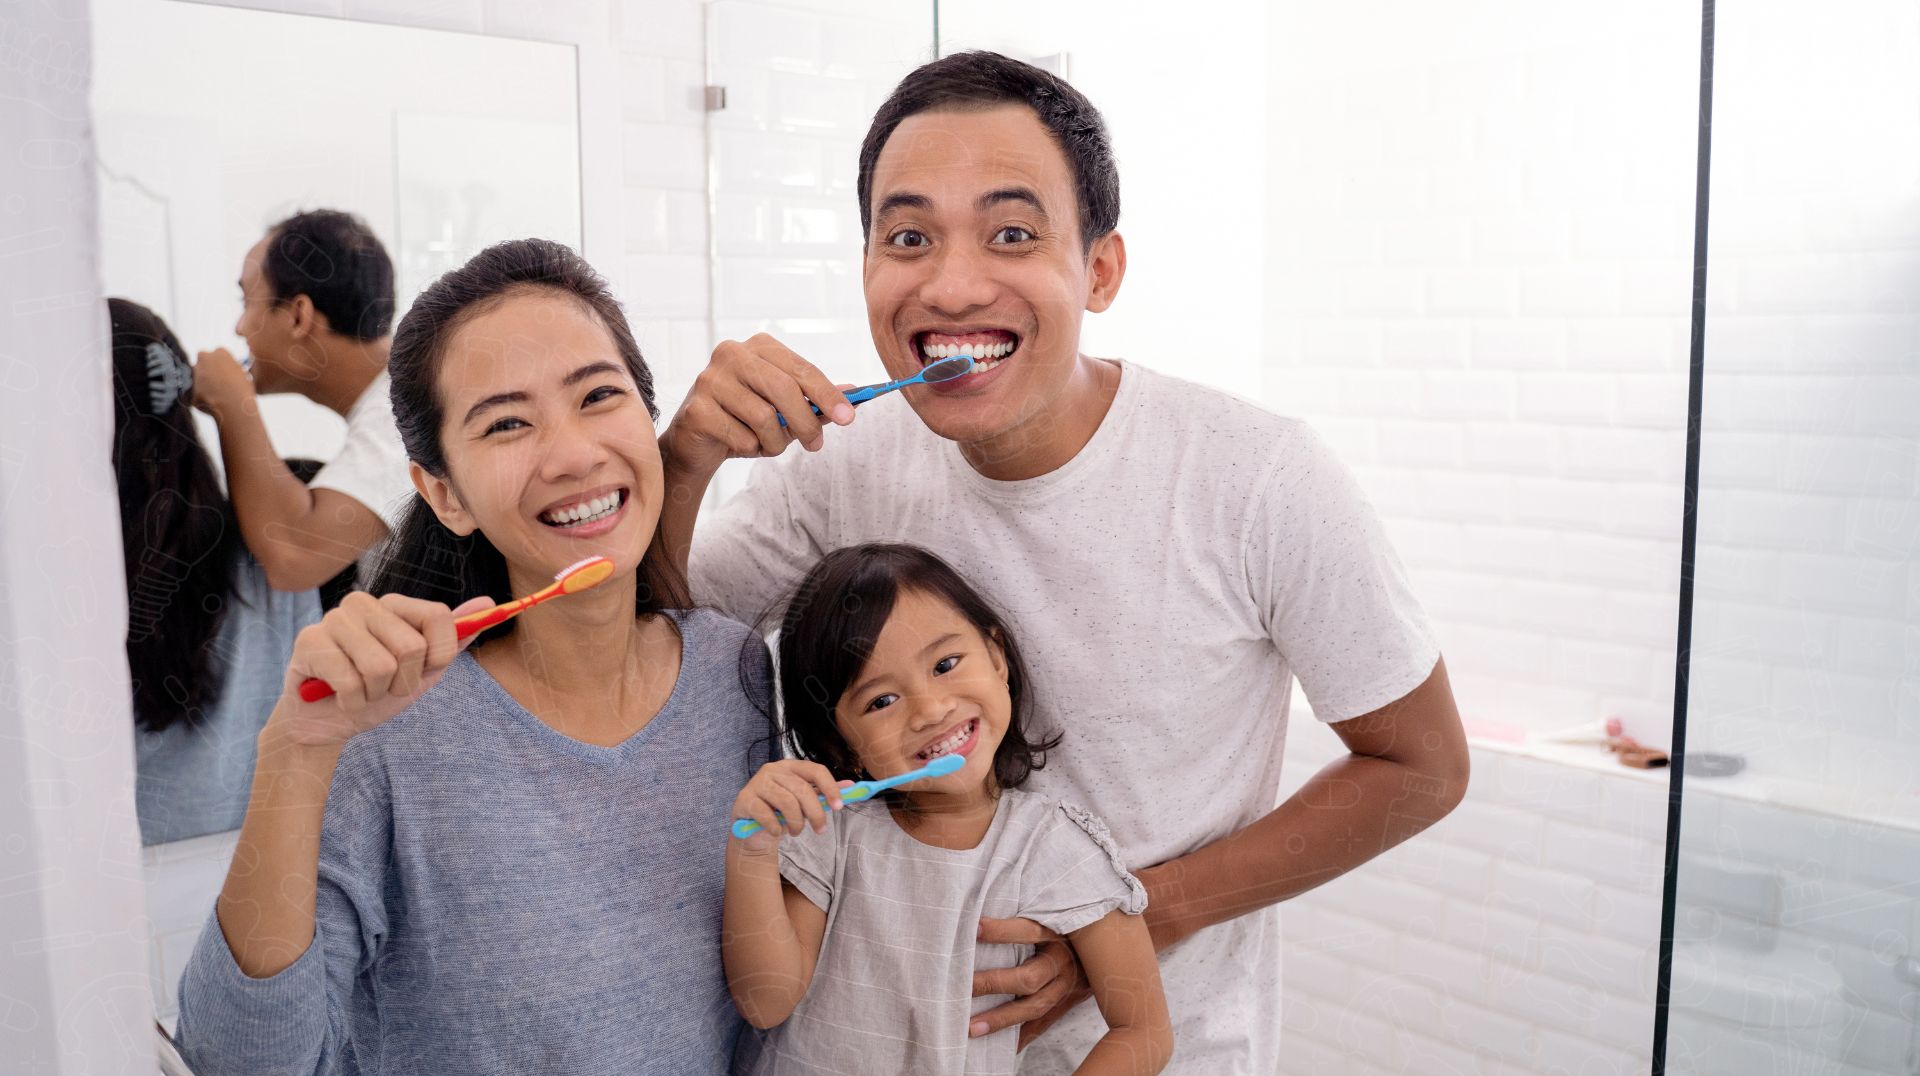 Family Dental Health Tips for Keeping Everyone's Smiles in Tip-Top Shape